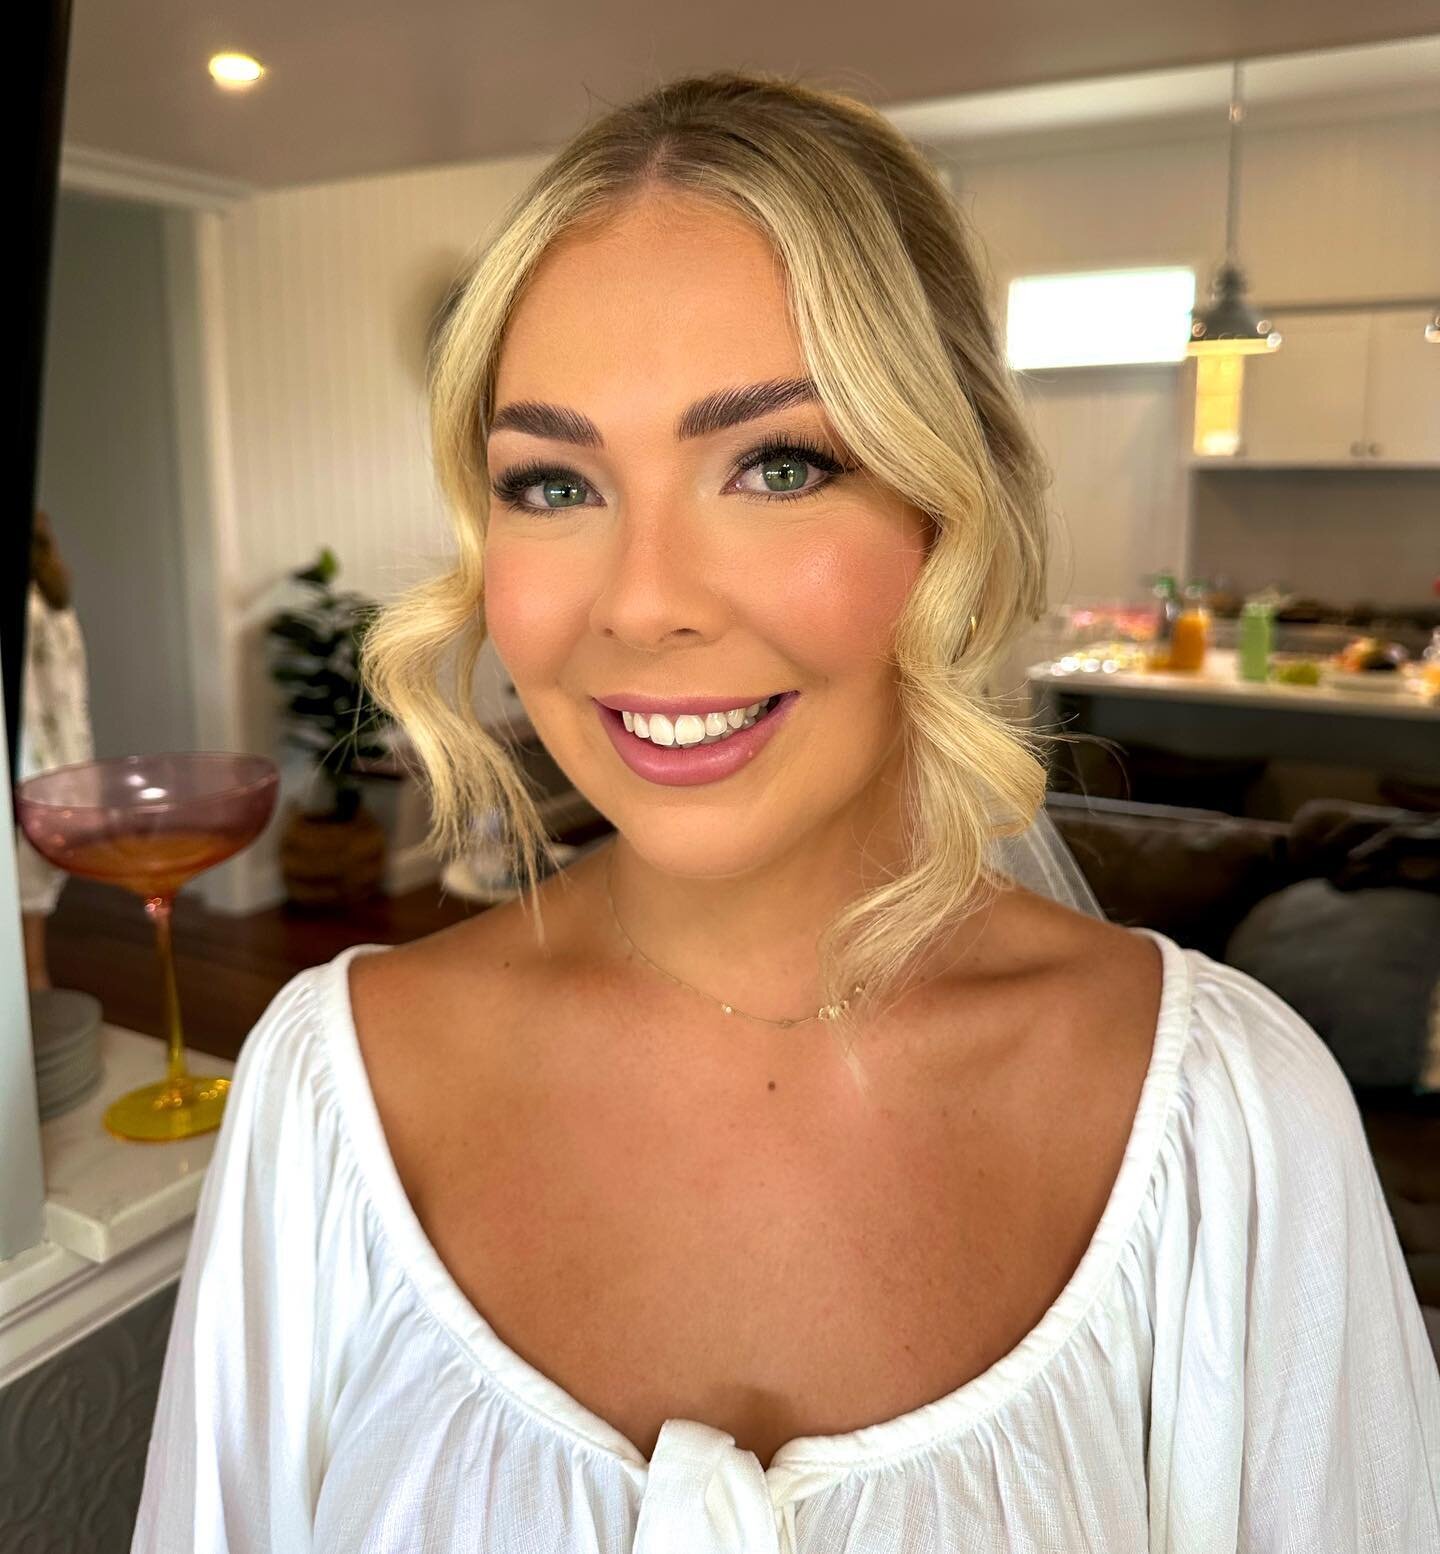 &mdash;&mdash; ALEX // bridal perfection! 💕 For her glowing &amp; blushing bridal glam look, my products hero&rsquo;s listed below&hellip;

* @narsissist Liquid Blush in &lsquo;Orgasm&rsquo;
* @charlottetilbury Flawless Filter 
* @meccamax Brow Soap